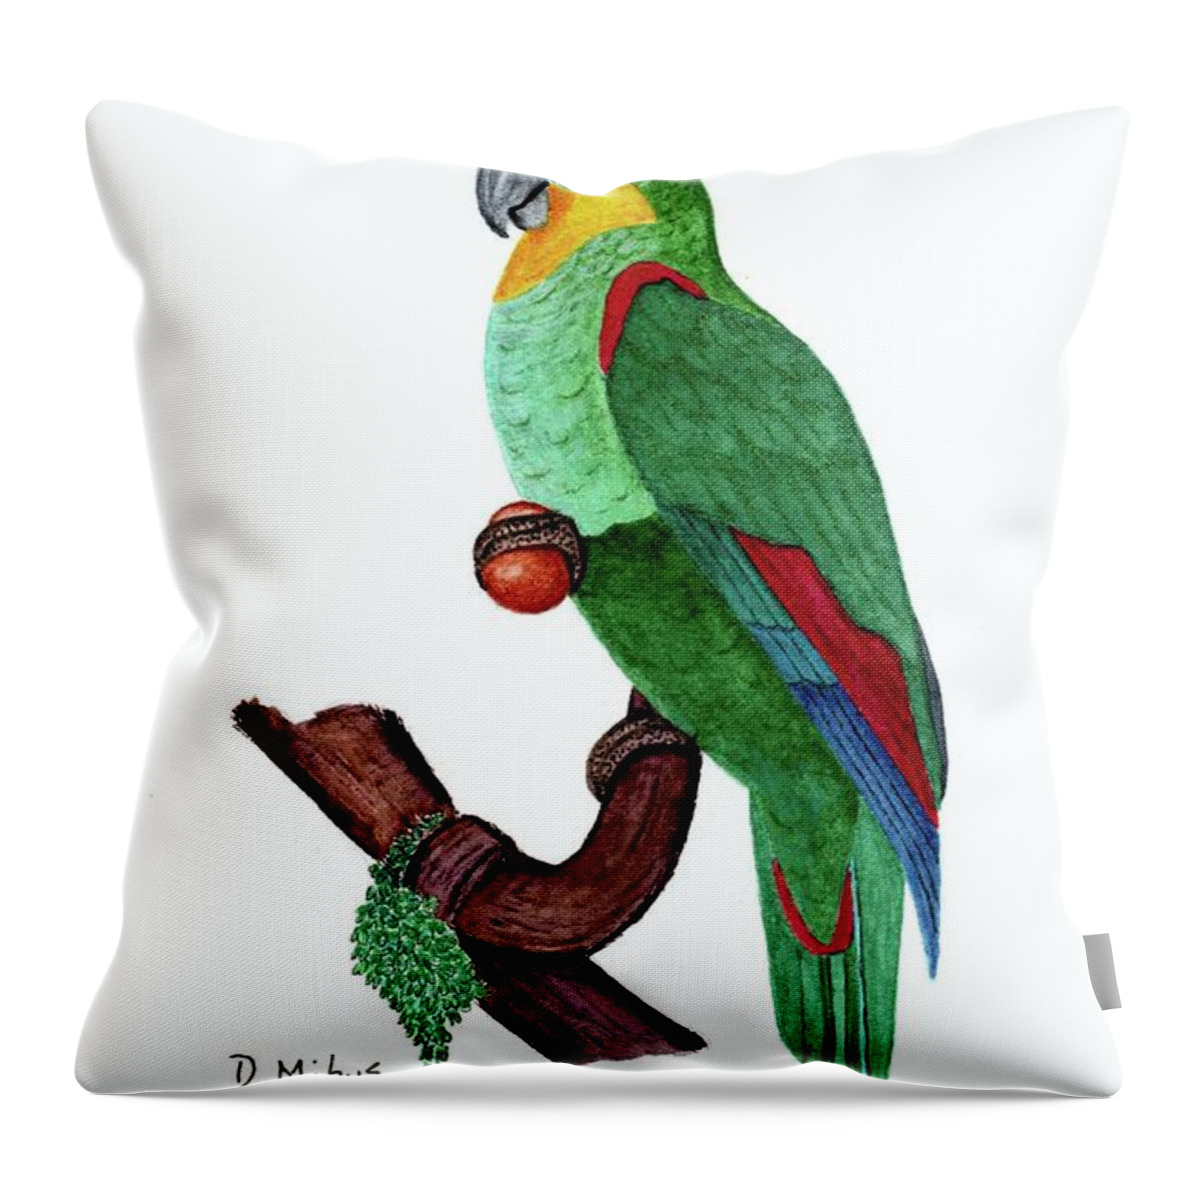 Blue Fronted Amazon Parrot Throw Pillow featuring the painting Blue Fronted Parrot Day 5 Challenge by Donna Mibus